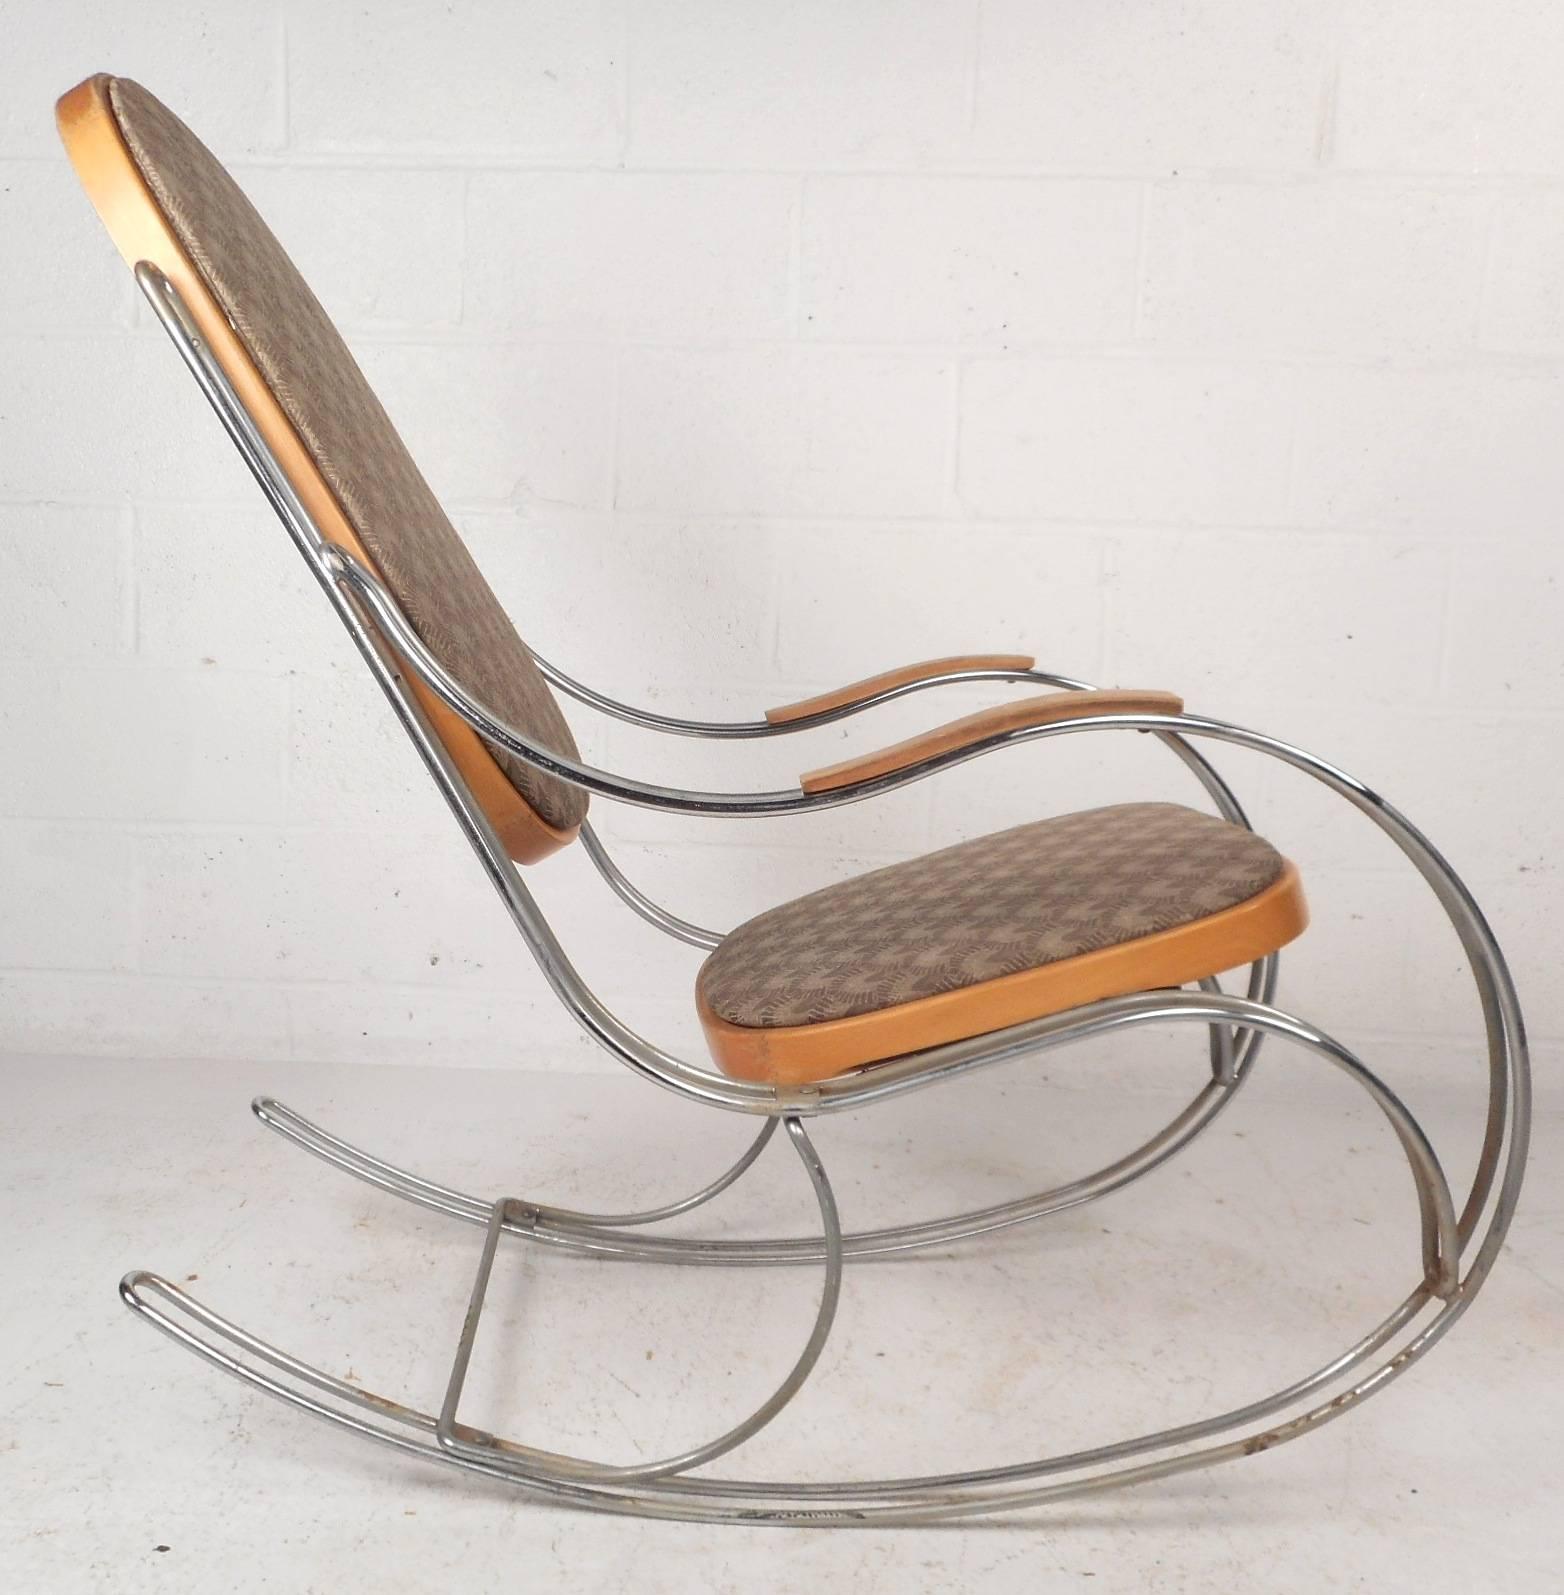 This wonderful vintage modern rocking chair features a sculptural bent rod chrome frame. Stylish design with an upholstered seat and backrest complimented by maple wood. Sleek and comfortable rocker makes the perfect addition to any seating